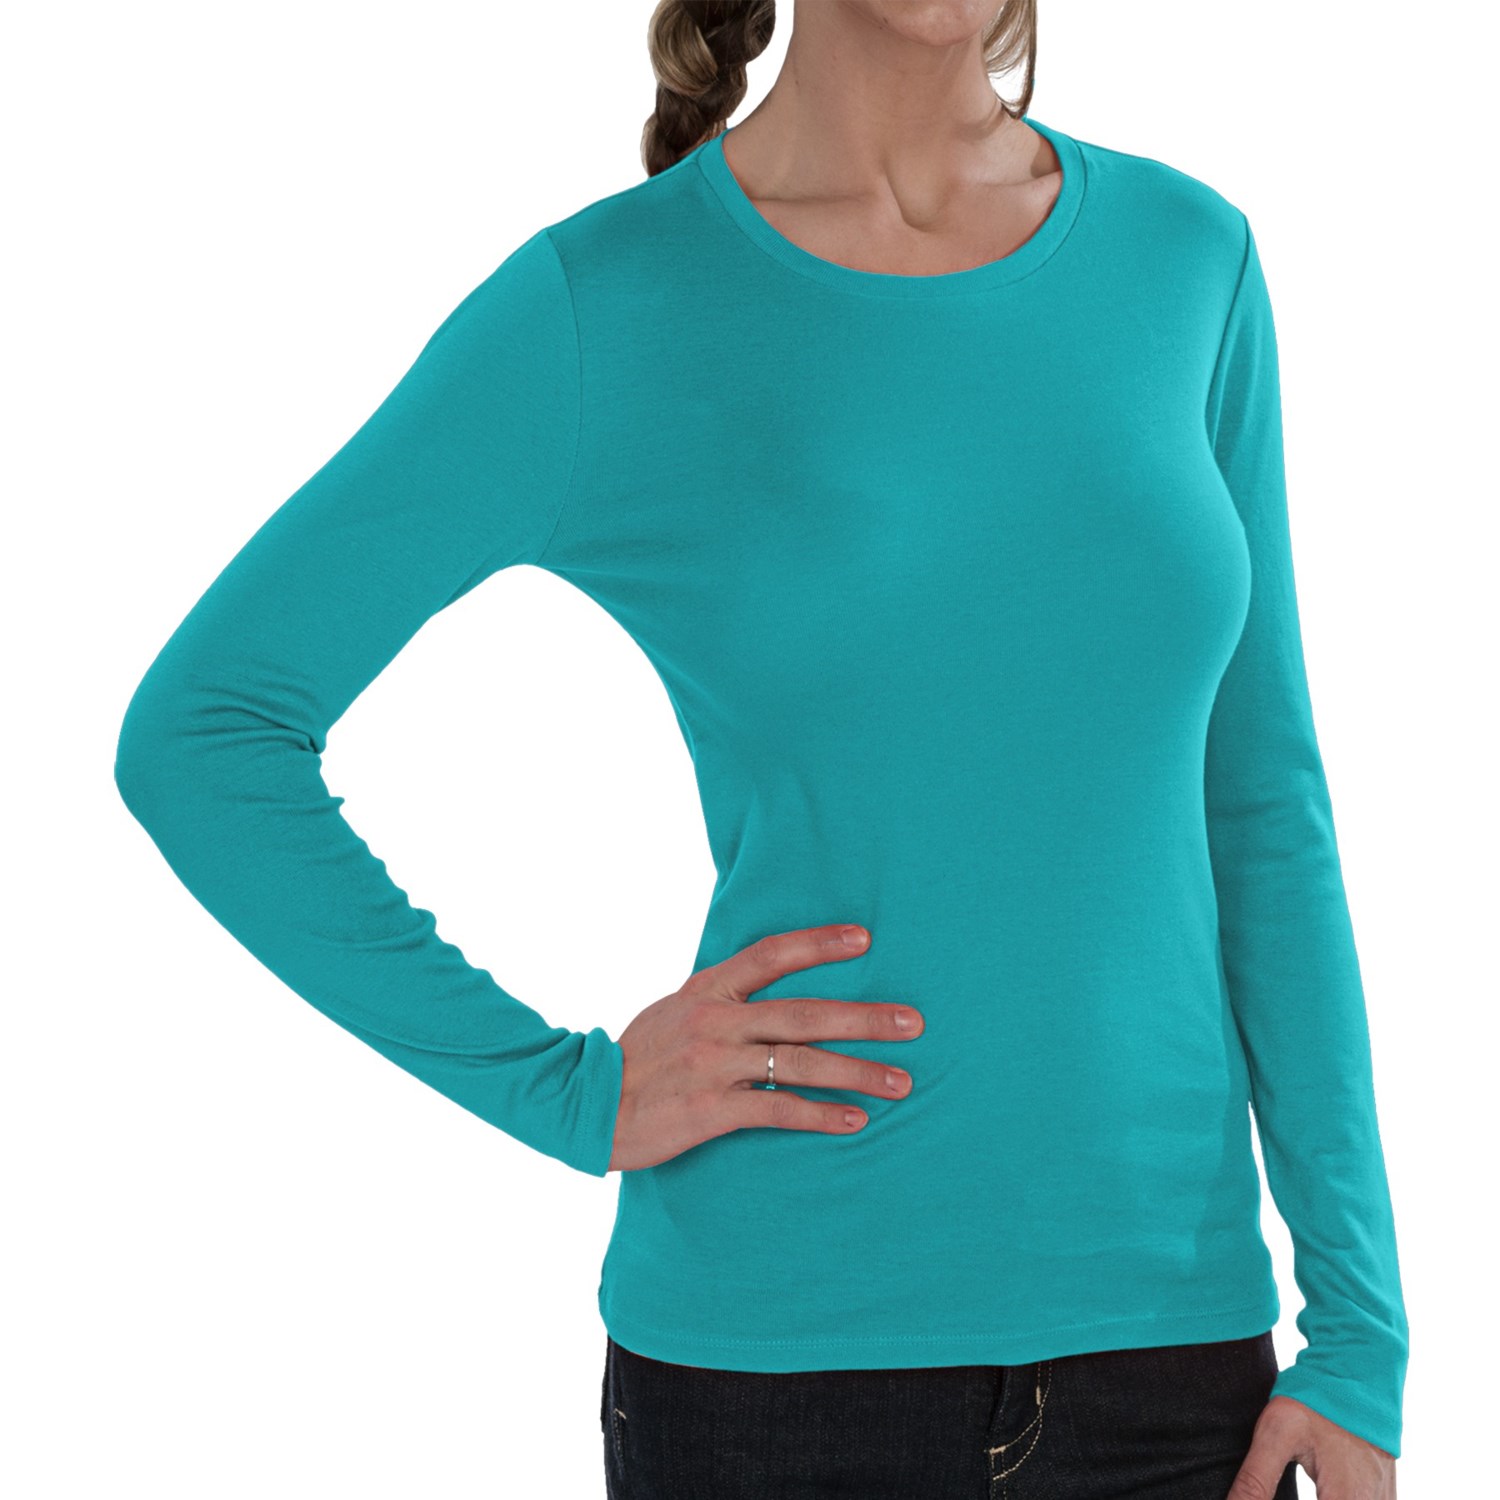 Cotton Crew Neck T-Shirt - Long Sleeve (For Women) - Save 67%